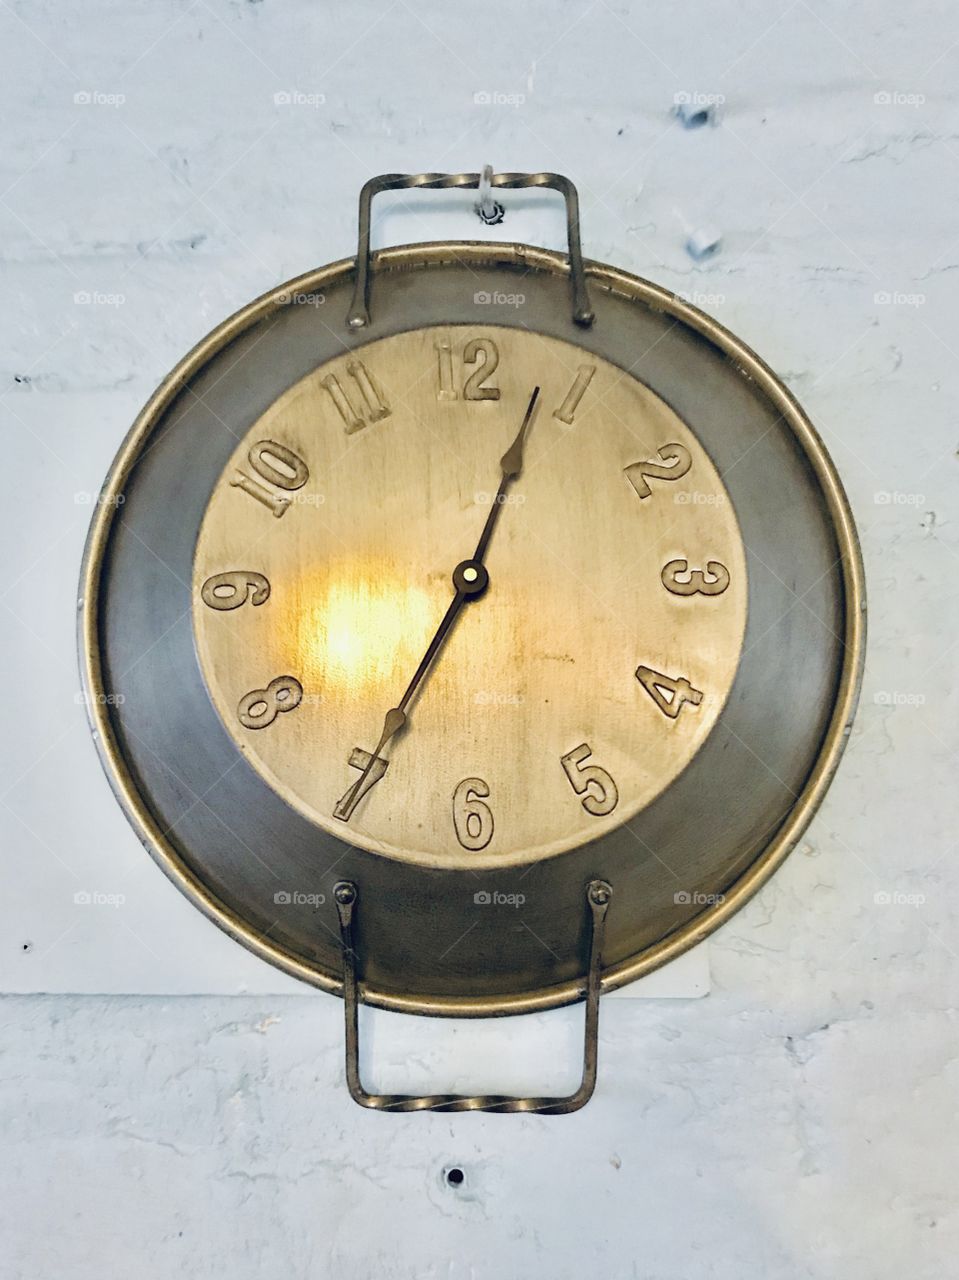 A clock made of an old pan on the wall 